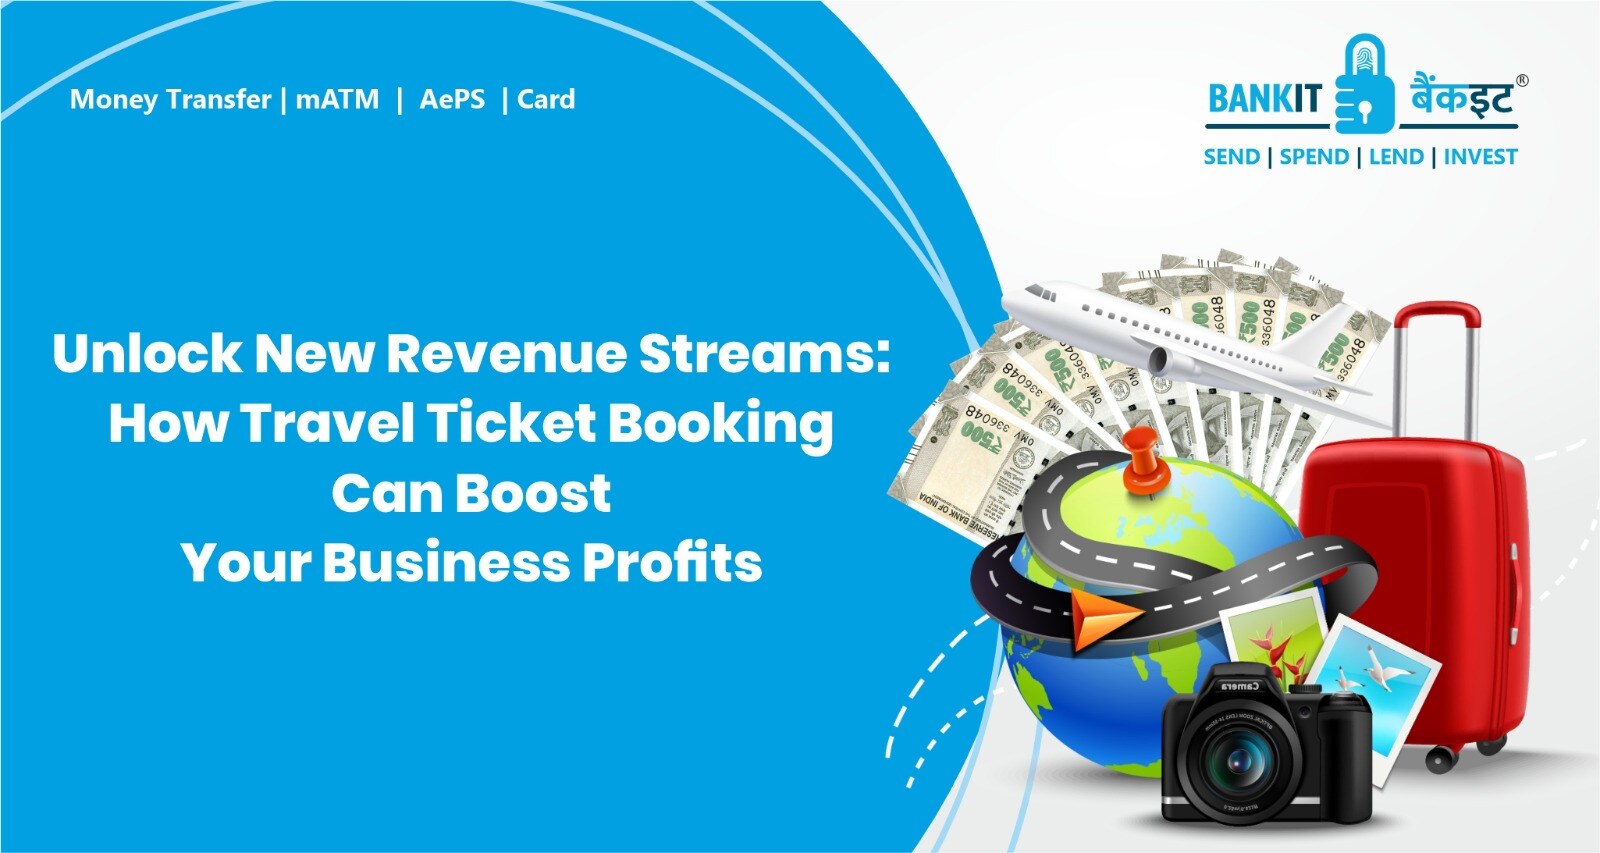 An Image showing How Travel Ticket Booking Can Boost Your Business Profits